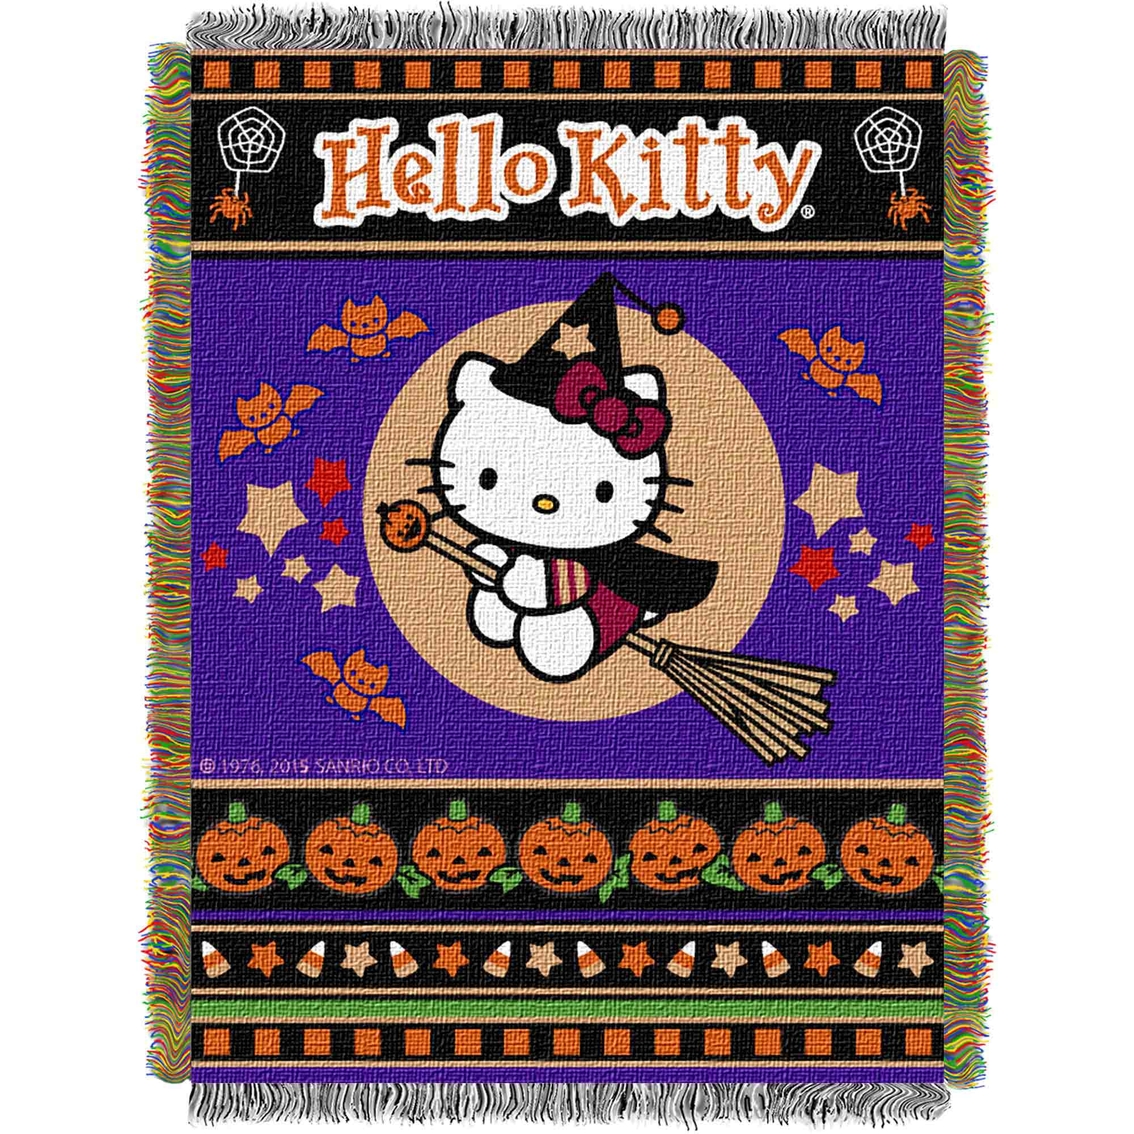 Northwest Hello Kitty: Witchy Kitty Woven Tapestry Throw